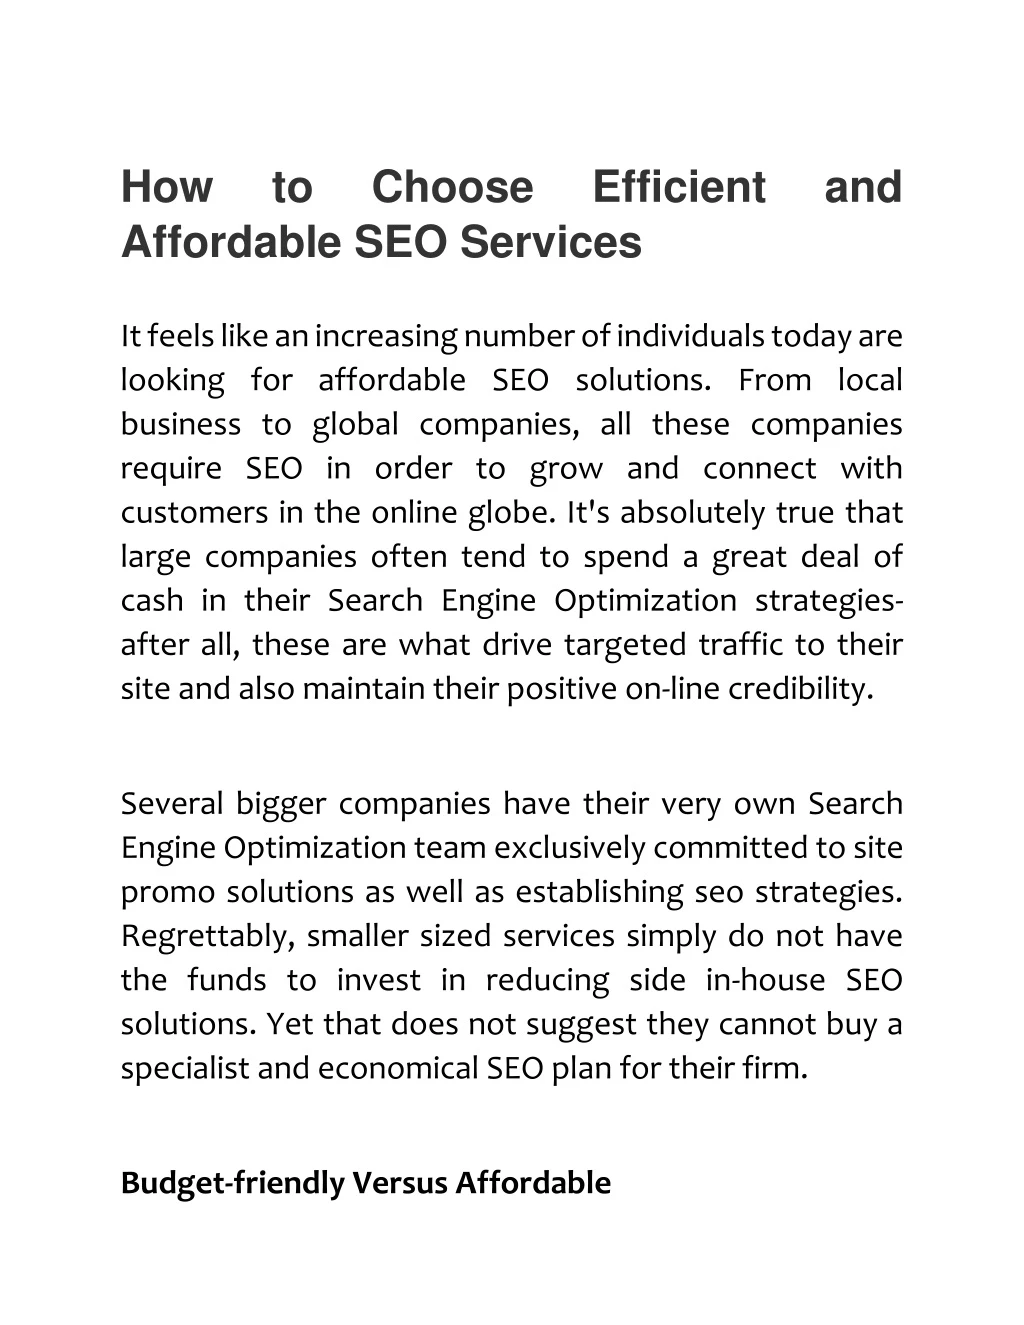 how affordable seo services